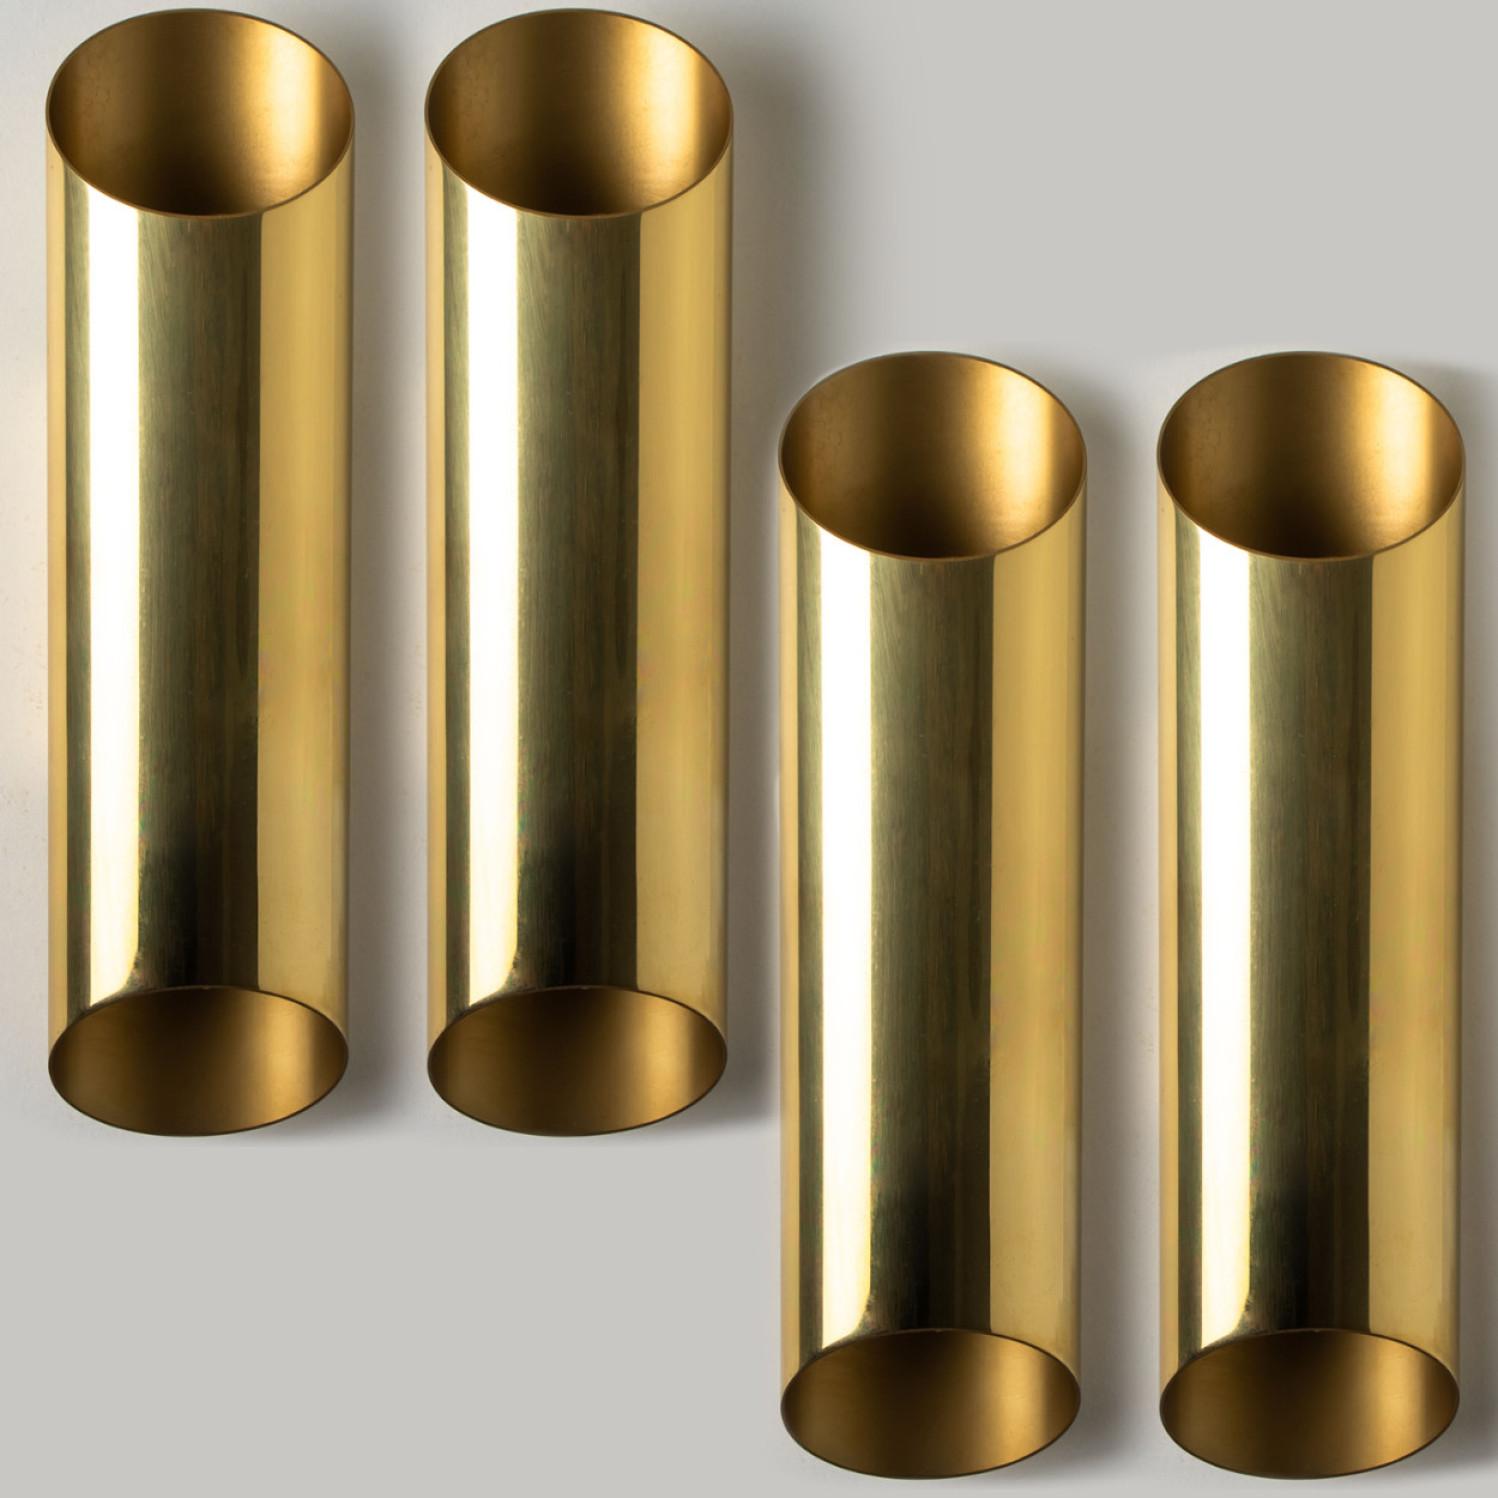 Other Geometrical Tube Brass Sconces in Style of Nanda Vigo, Italy, 1960s For Sale